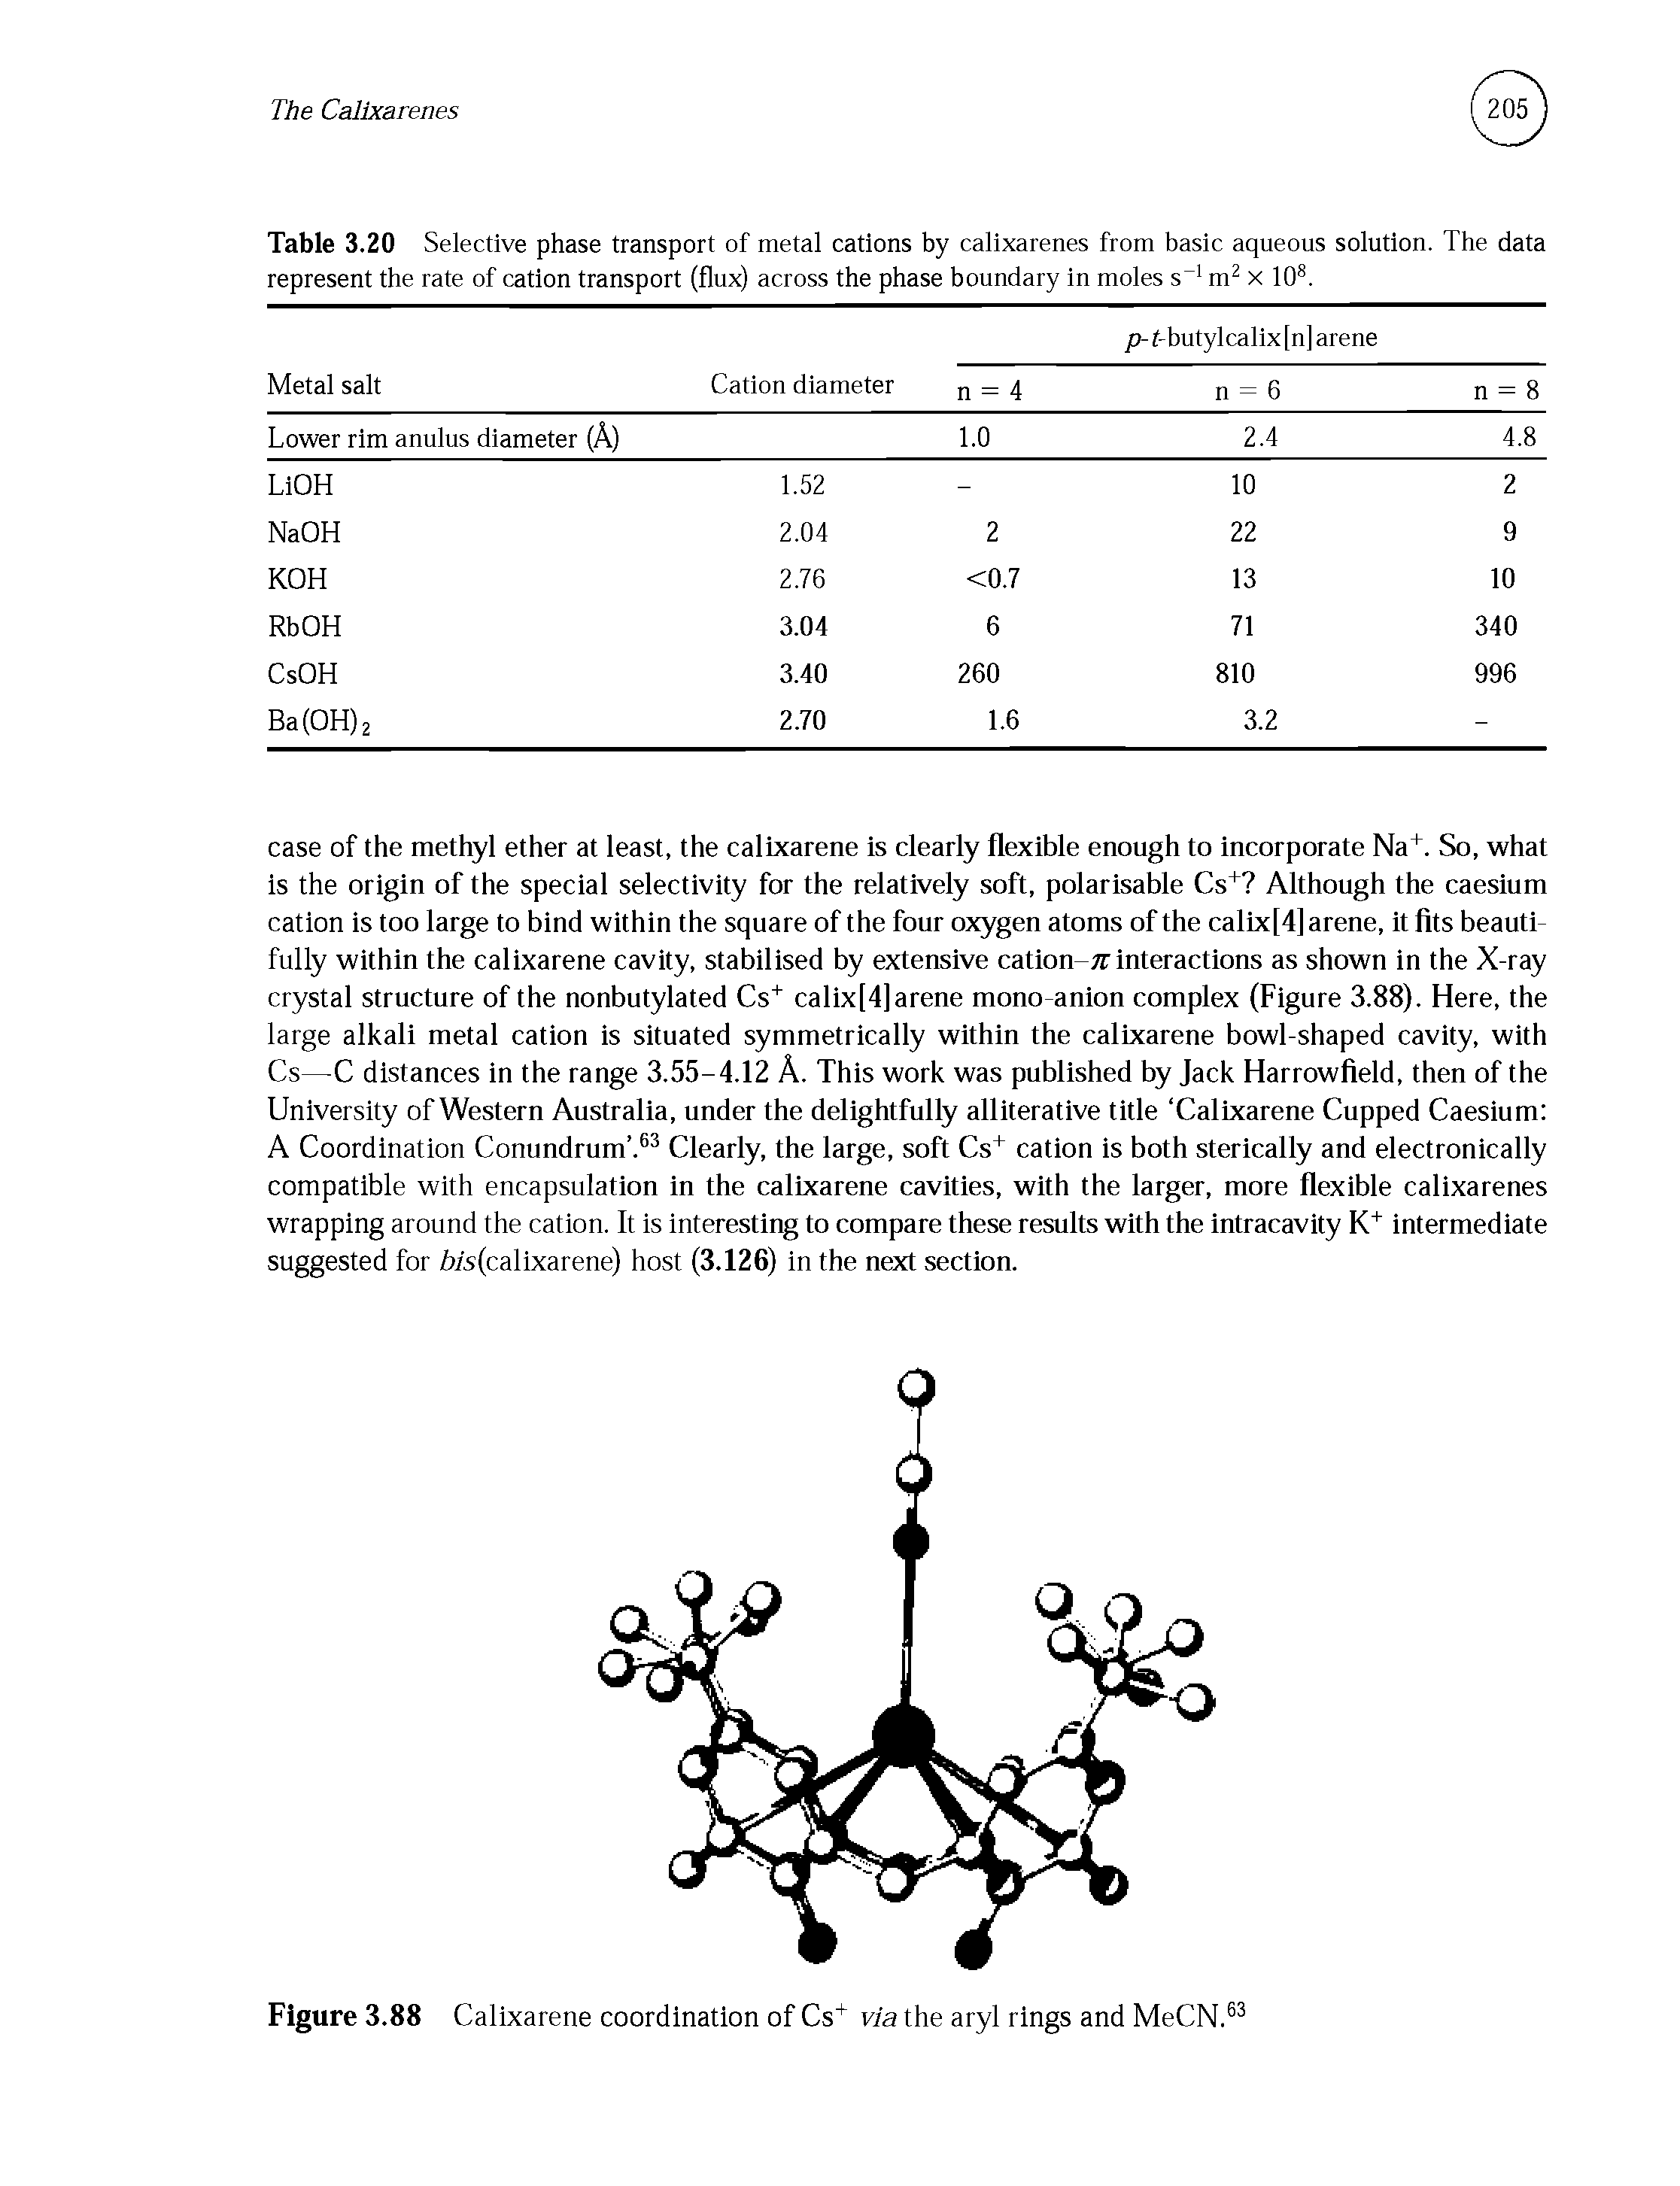 Table 3.20 Selective phase transport of metal cations by calixarenes from basic aqueous solution. The data represent the rate of cation transport (flux) across the phase boundary in moles s 1 m2 x 10s.